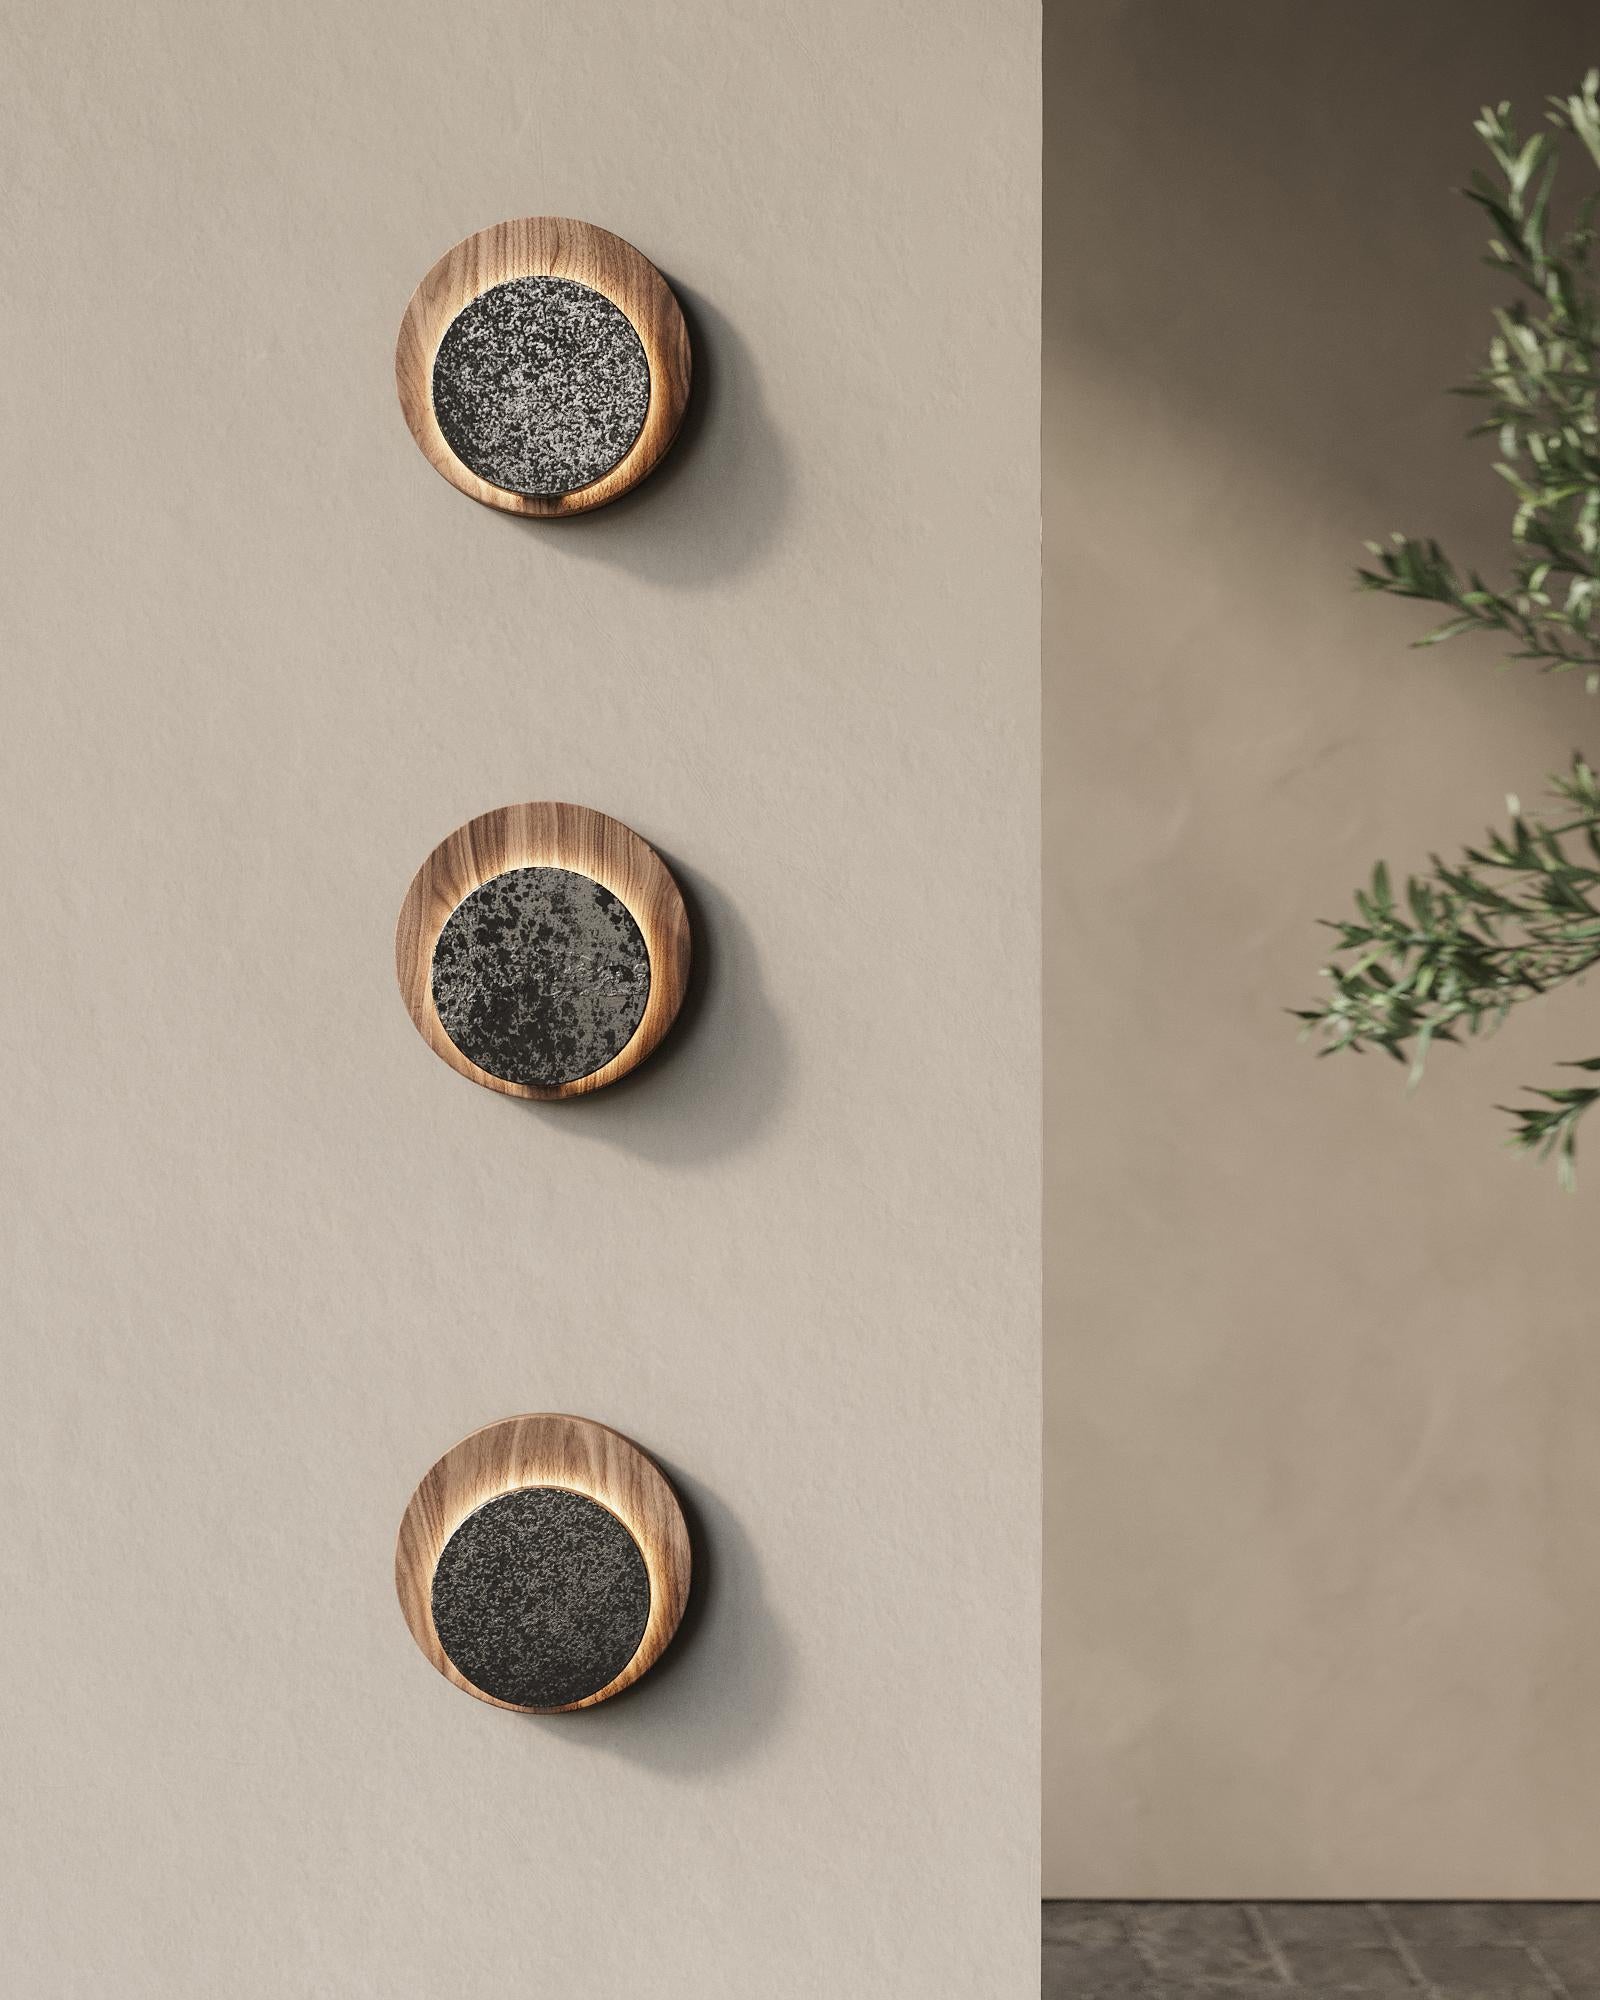 AURA WALL 14 consists of a solid walnut wood circle that contrasts with the monochromatic tones of the porcelainized steel piece.

Iluminant: Incl. 4 W G9 LED 402 lm, 120 V ~ 60 Hz 0.04 A
2700 K / Not Dimmable